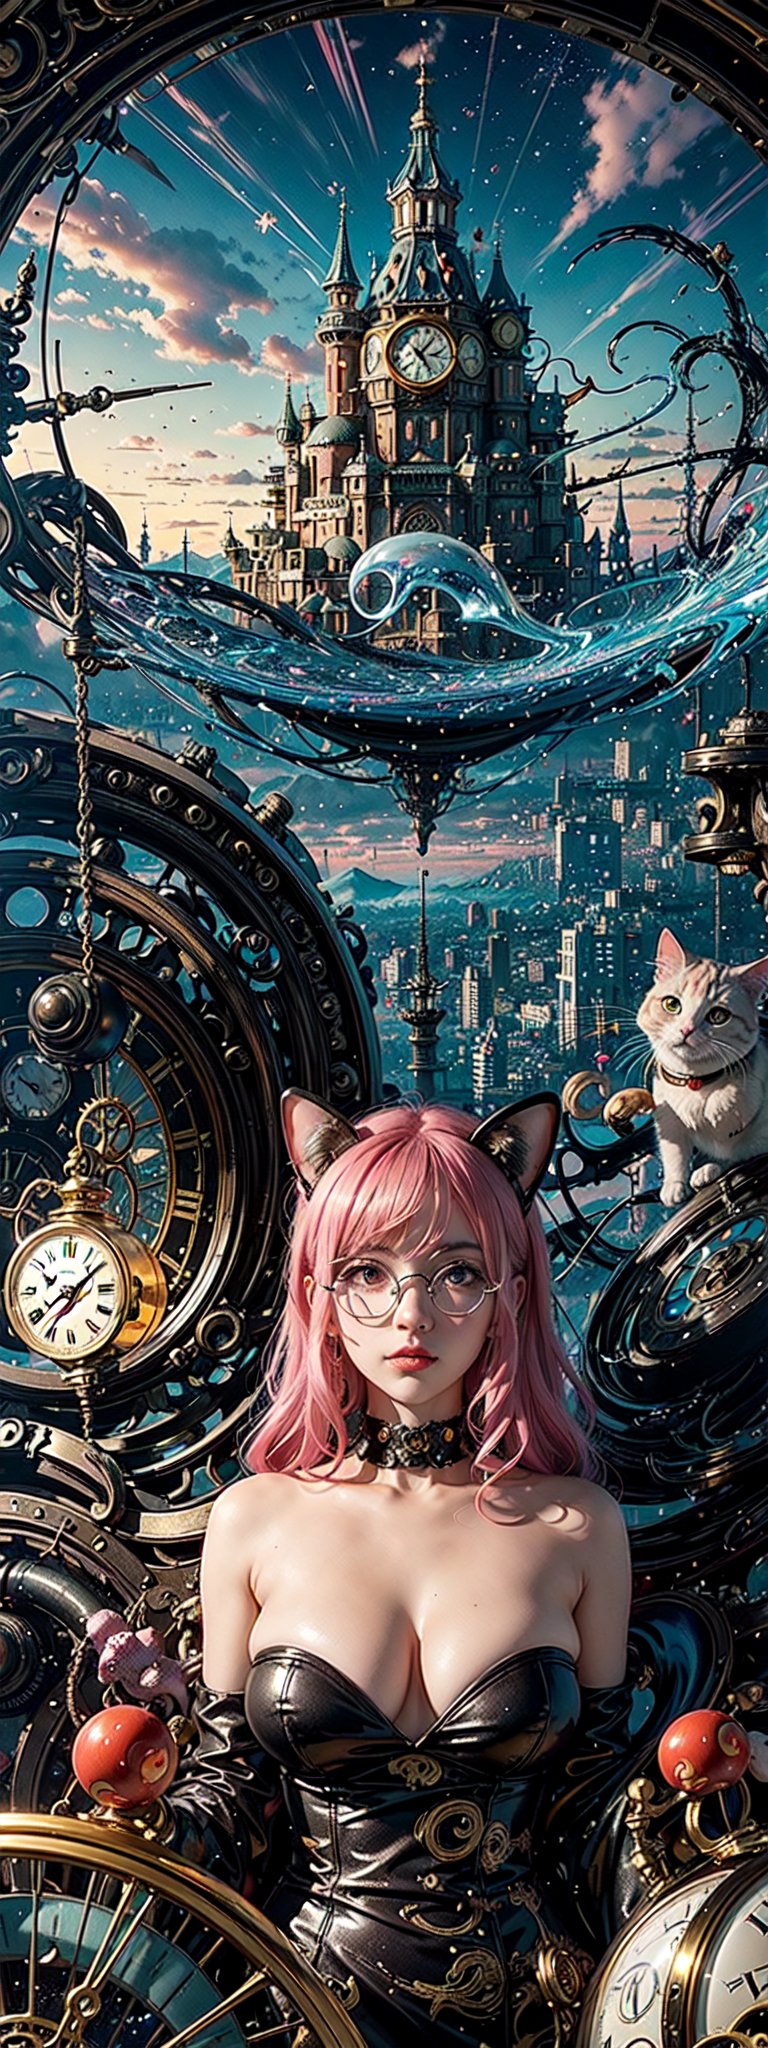 A surrealistic anime landscape unfolds: Salvador Dali's iconic melting clocks and distorted objects blend with vibrant anime colors and stylized characters. In a dreamlike setting, a (((bespectacled anime girl))) with a wispy mustache and curly hair peers out from behind a warped clock face, surrounded by swirling clouds of golden smoke. The cityscape in the background features buildings shaped like snails and mushrooms, while a giant, -pink cat watches over the scene, its eyes glowing like lanterns.,dali69